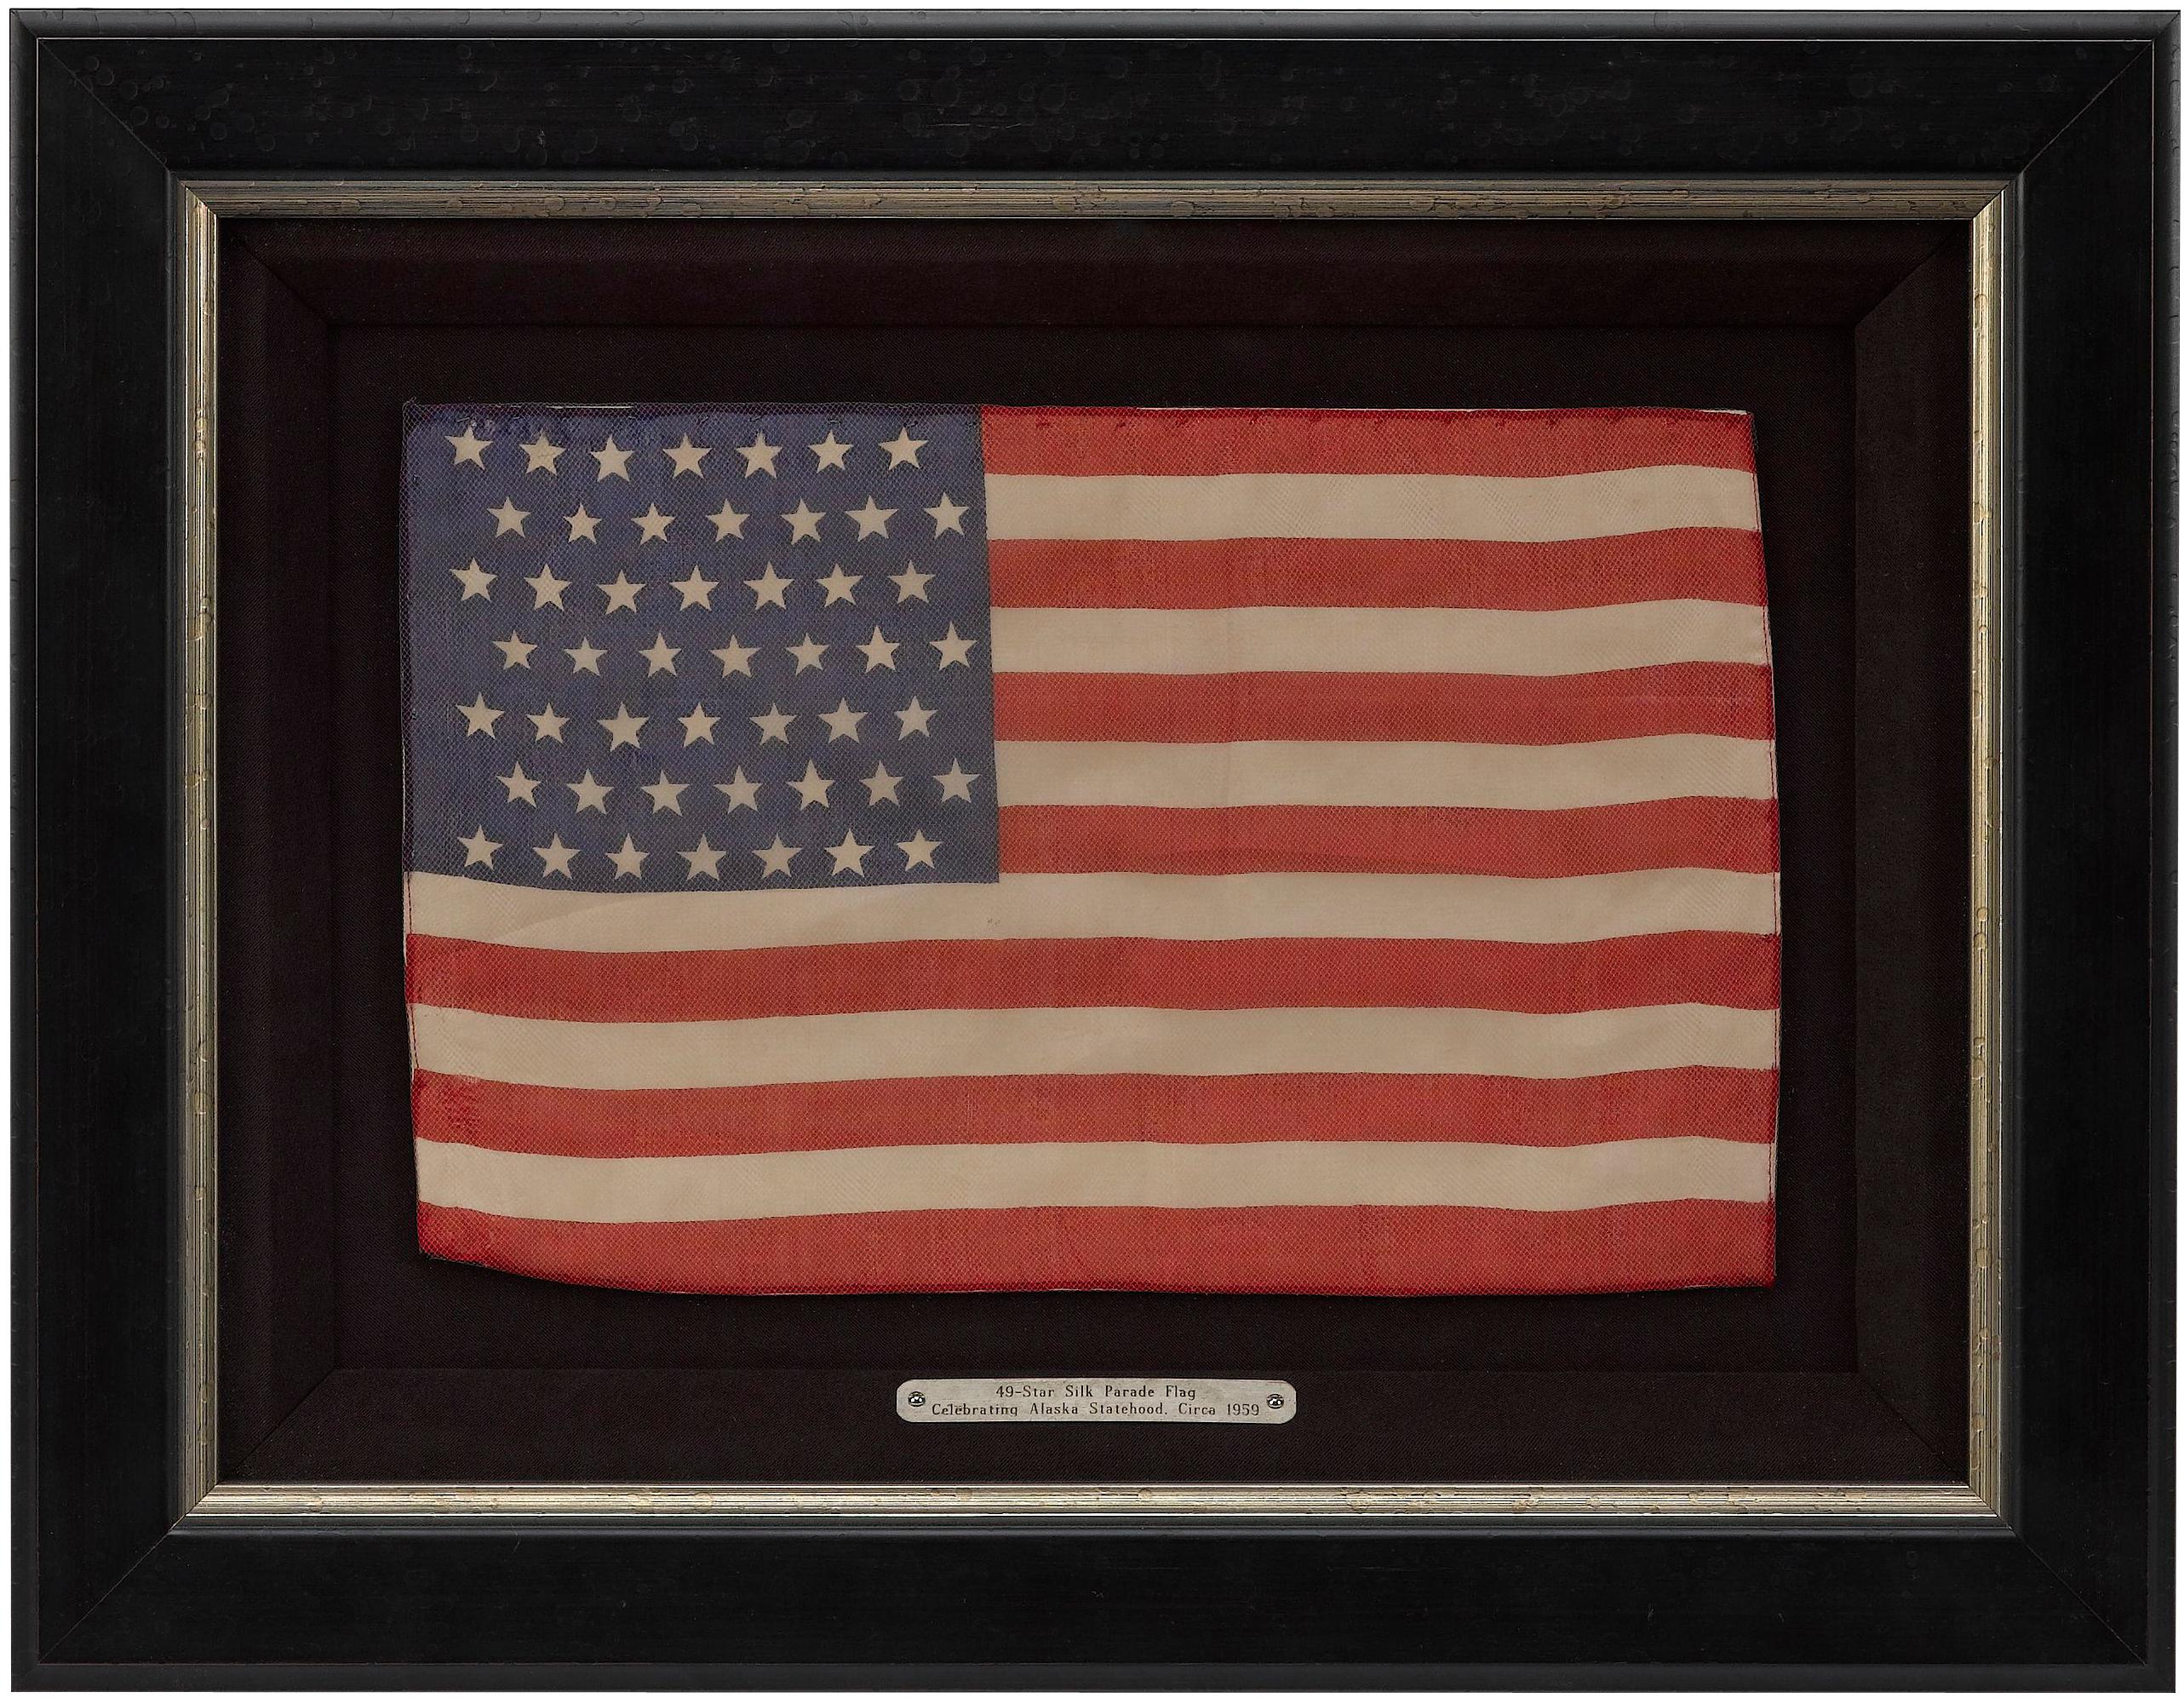 Presented is a 49-star American flag, celebrating Alaska statehood. The flag is printed on silk and has seven rows of seven stars in a staggered row pattern printed on the bright blue canton.

Alaska’s long path to statehood started in 1867, when